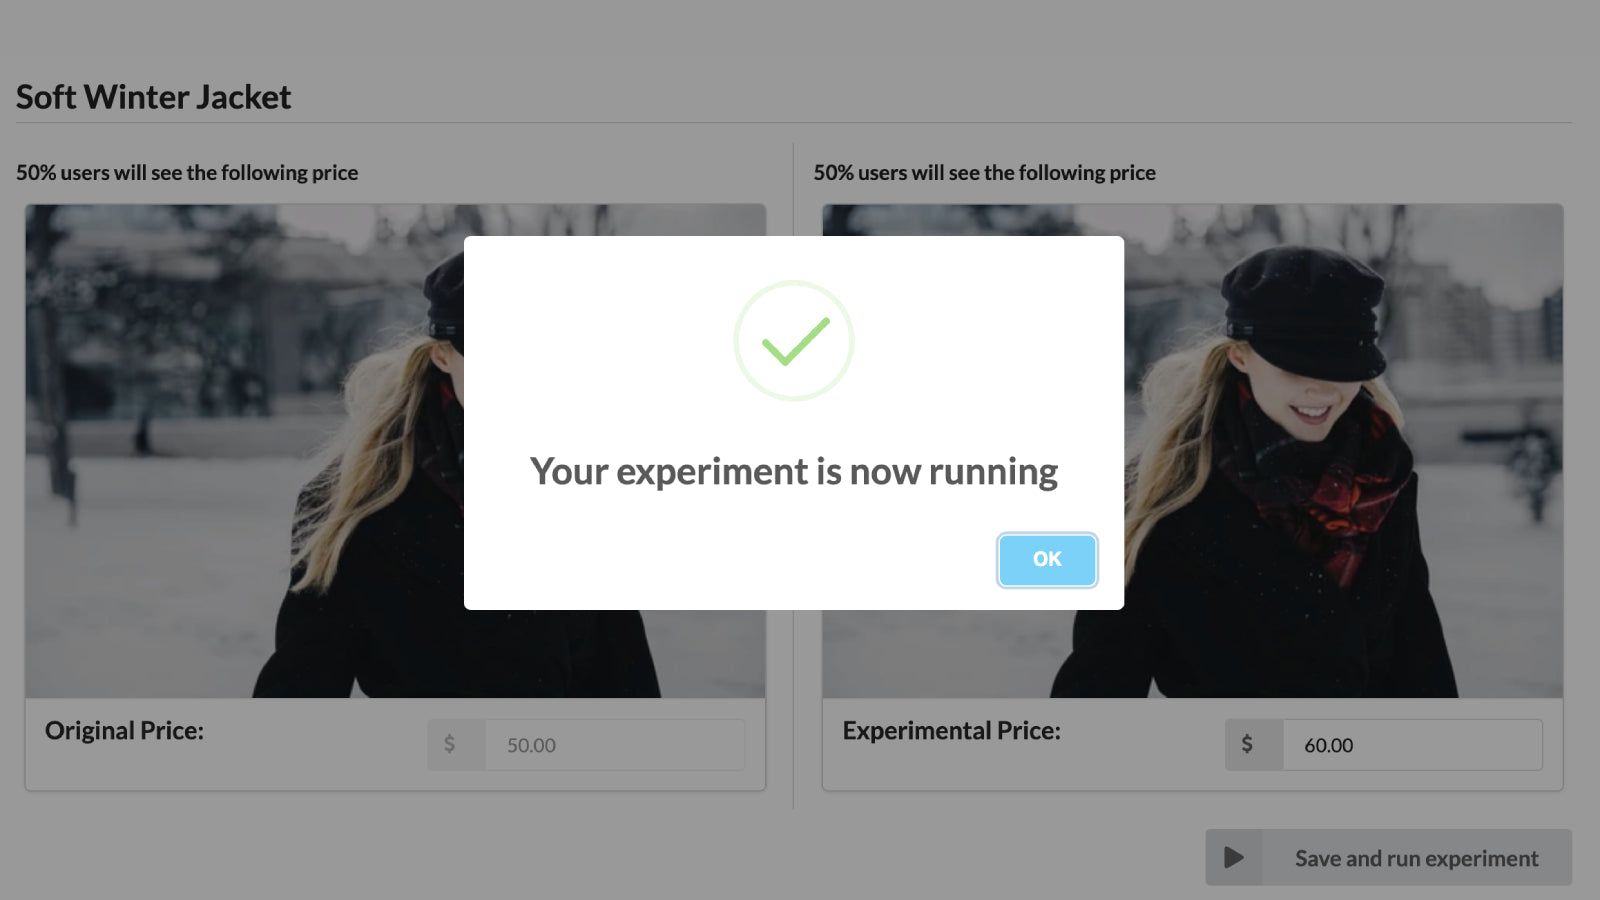 Running your experiment